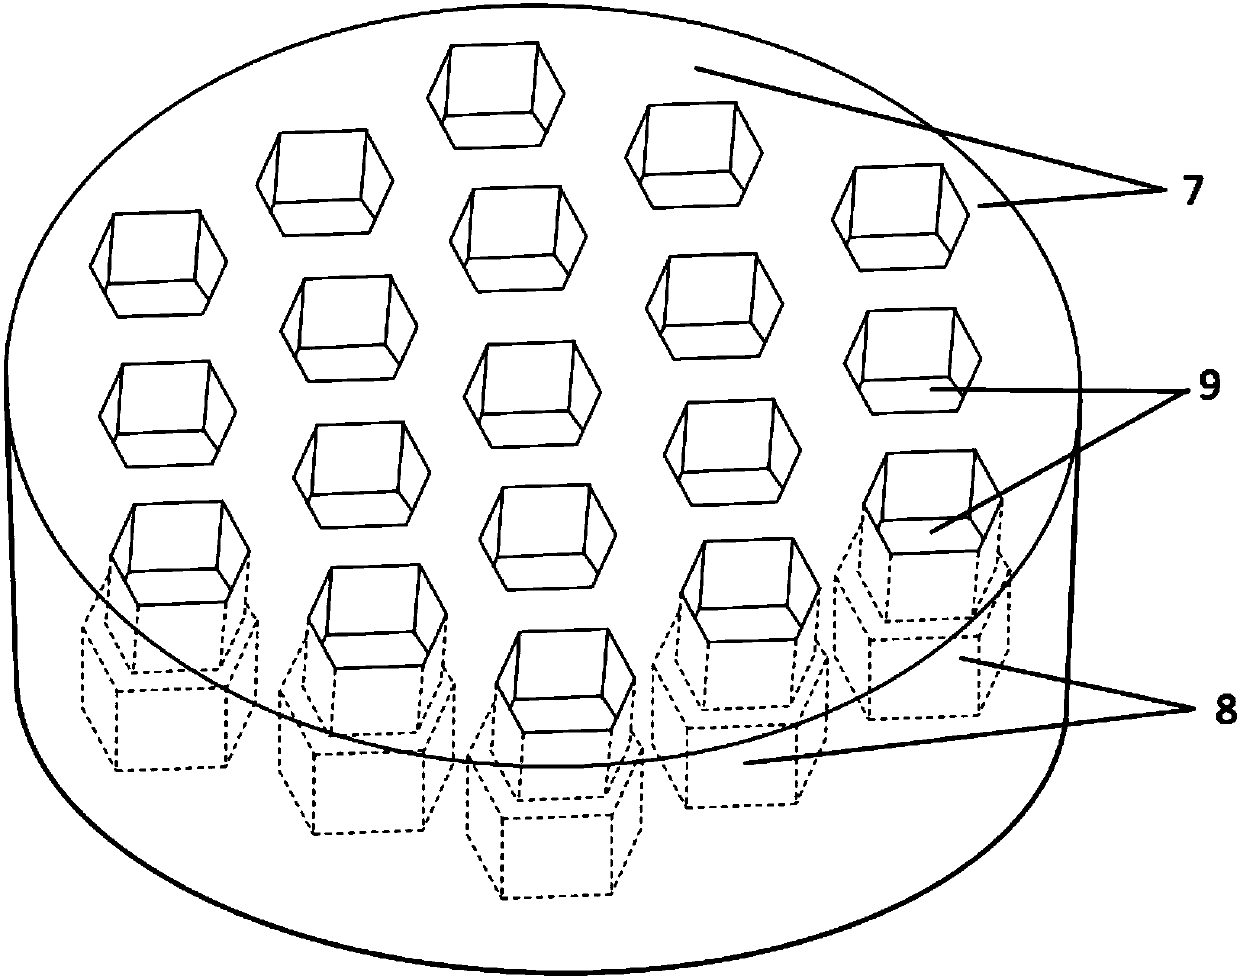 Same-temperature-field multichannel honeycomb array crucible